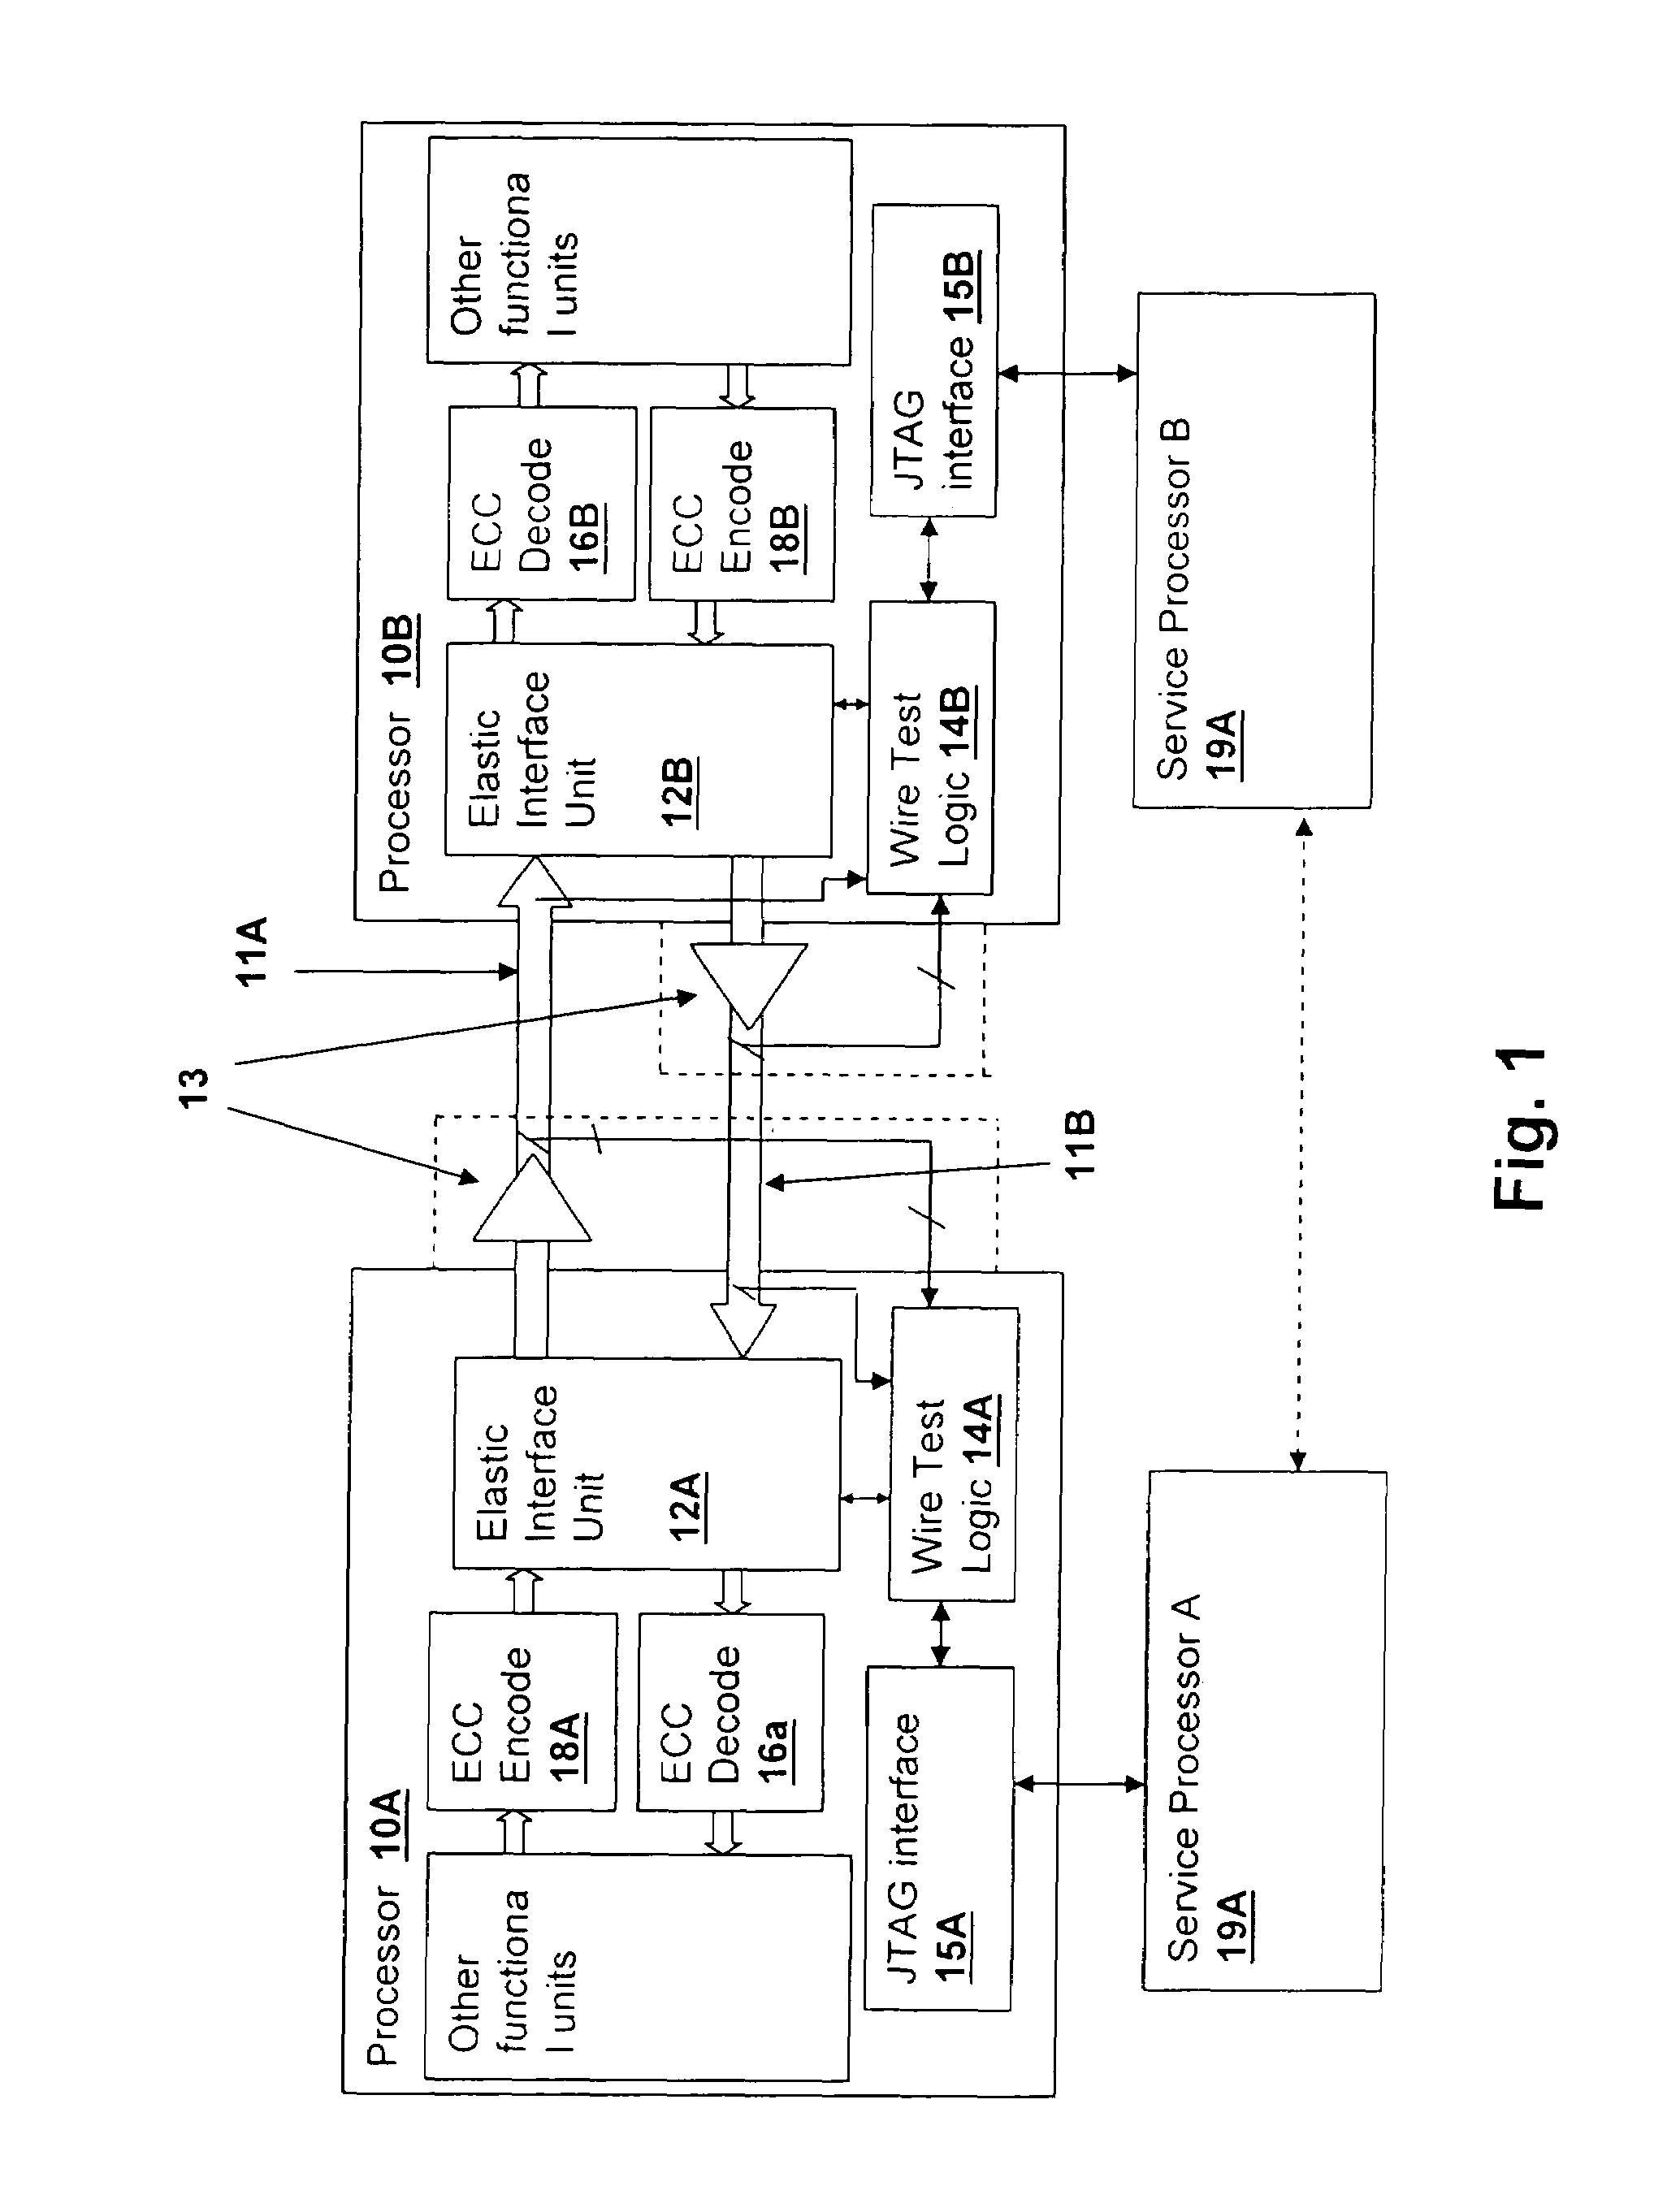 Method and apparatus for interface failure survivability using error correction